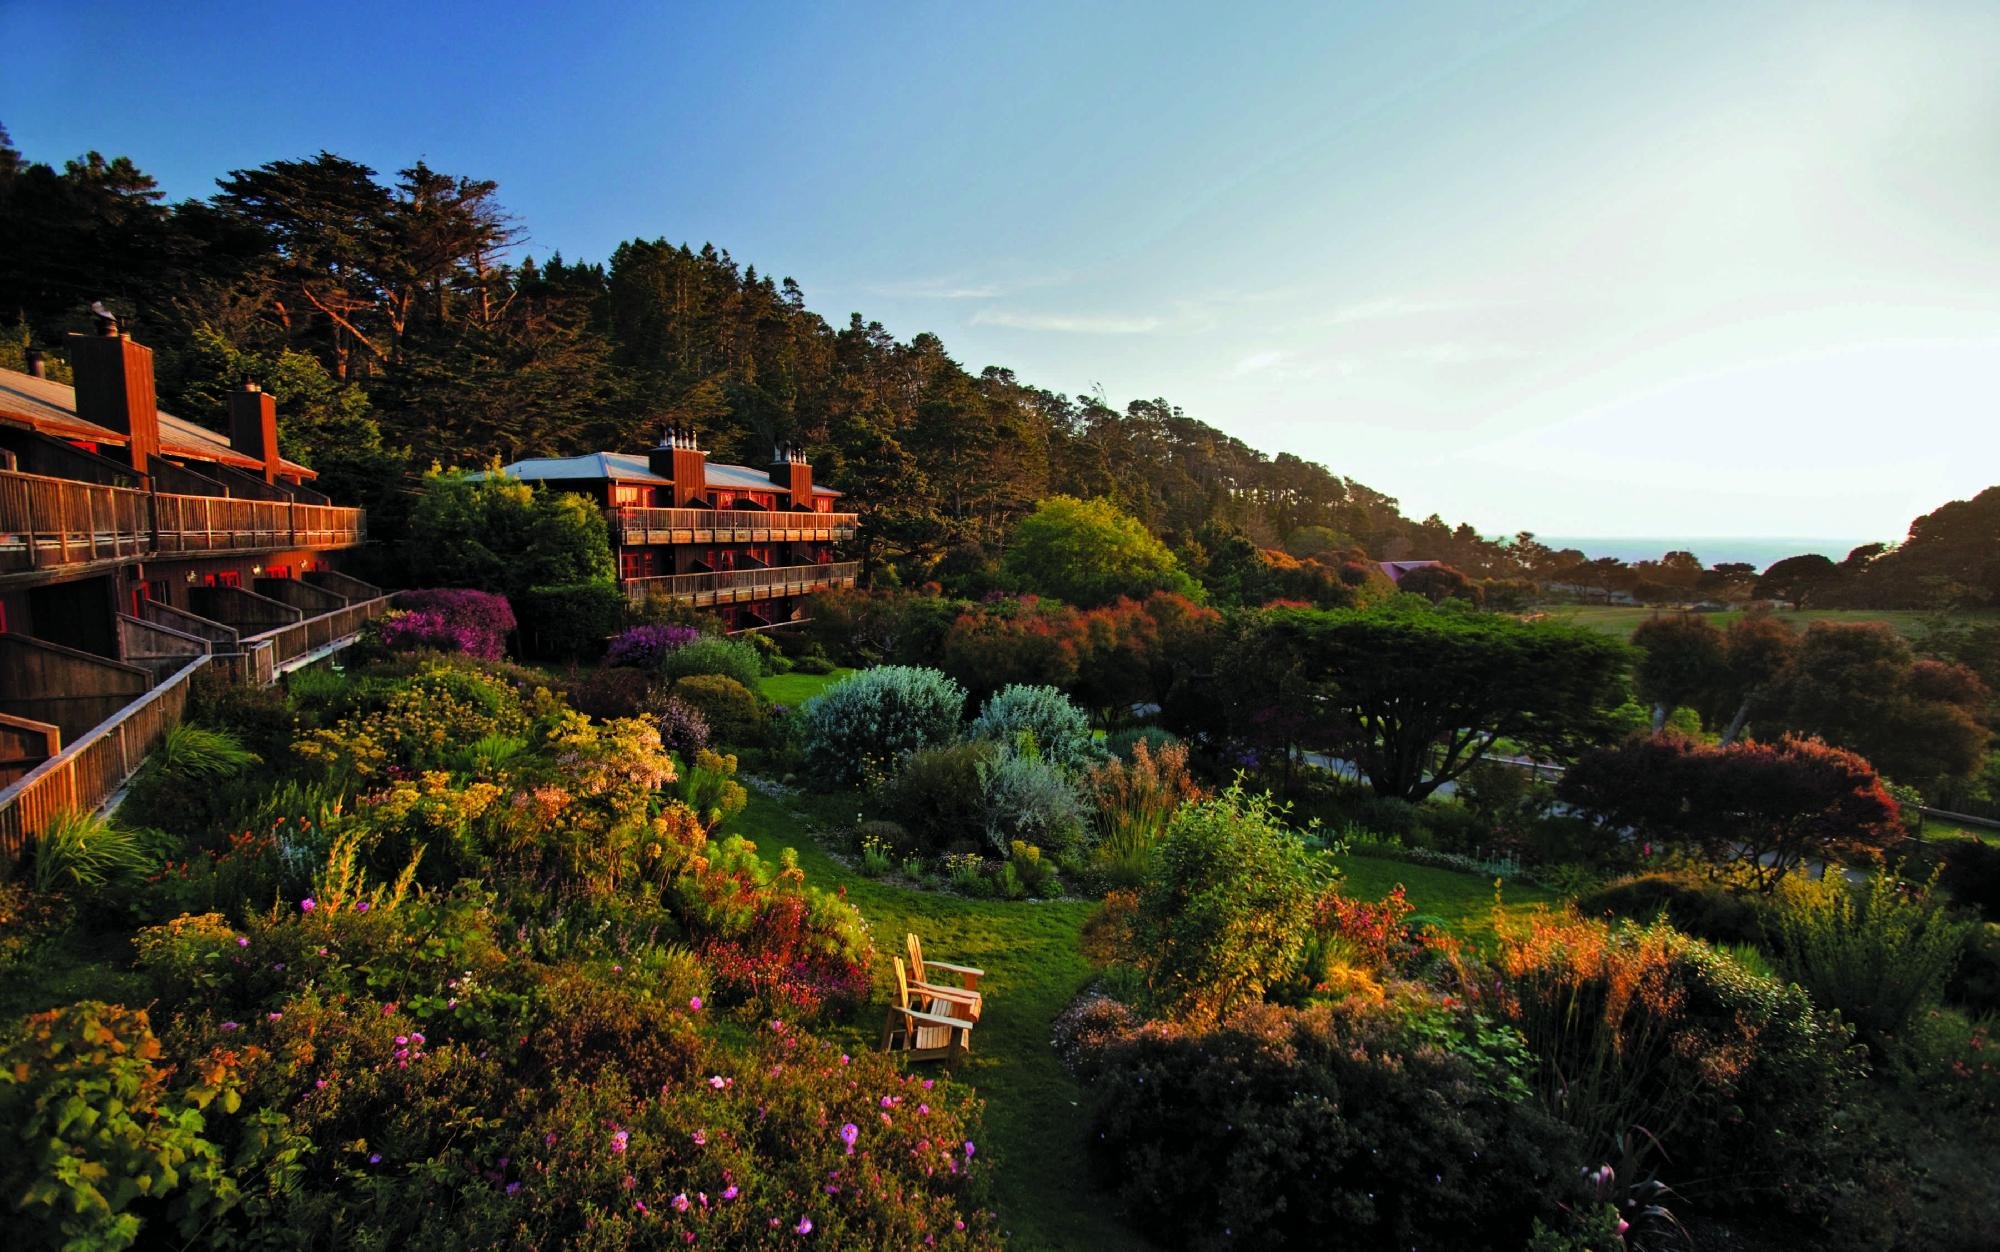 Spend The Night At This Secluded, Luxury Resort In Northern California